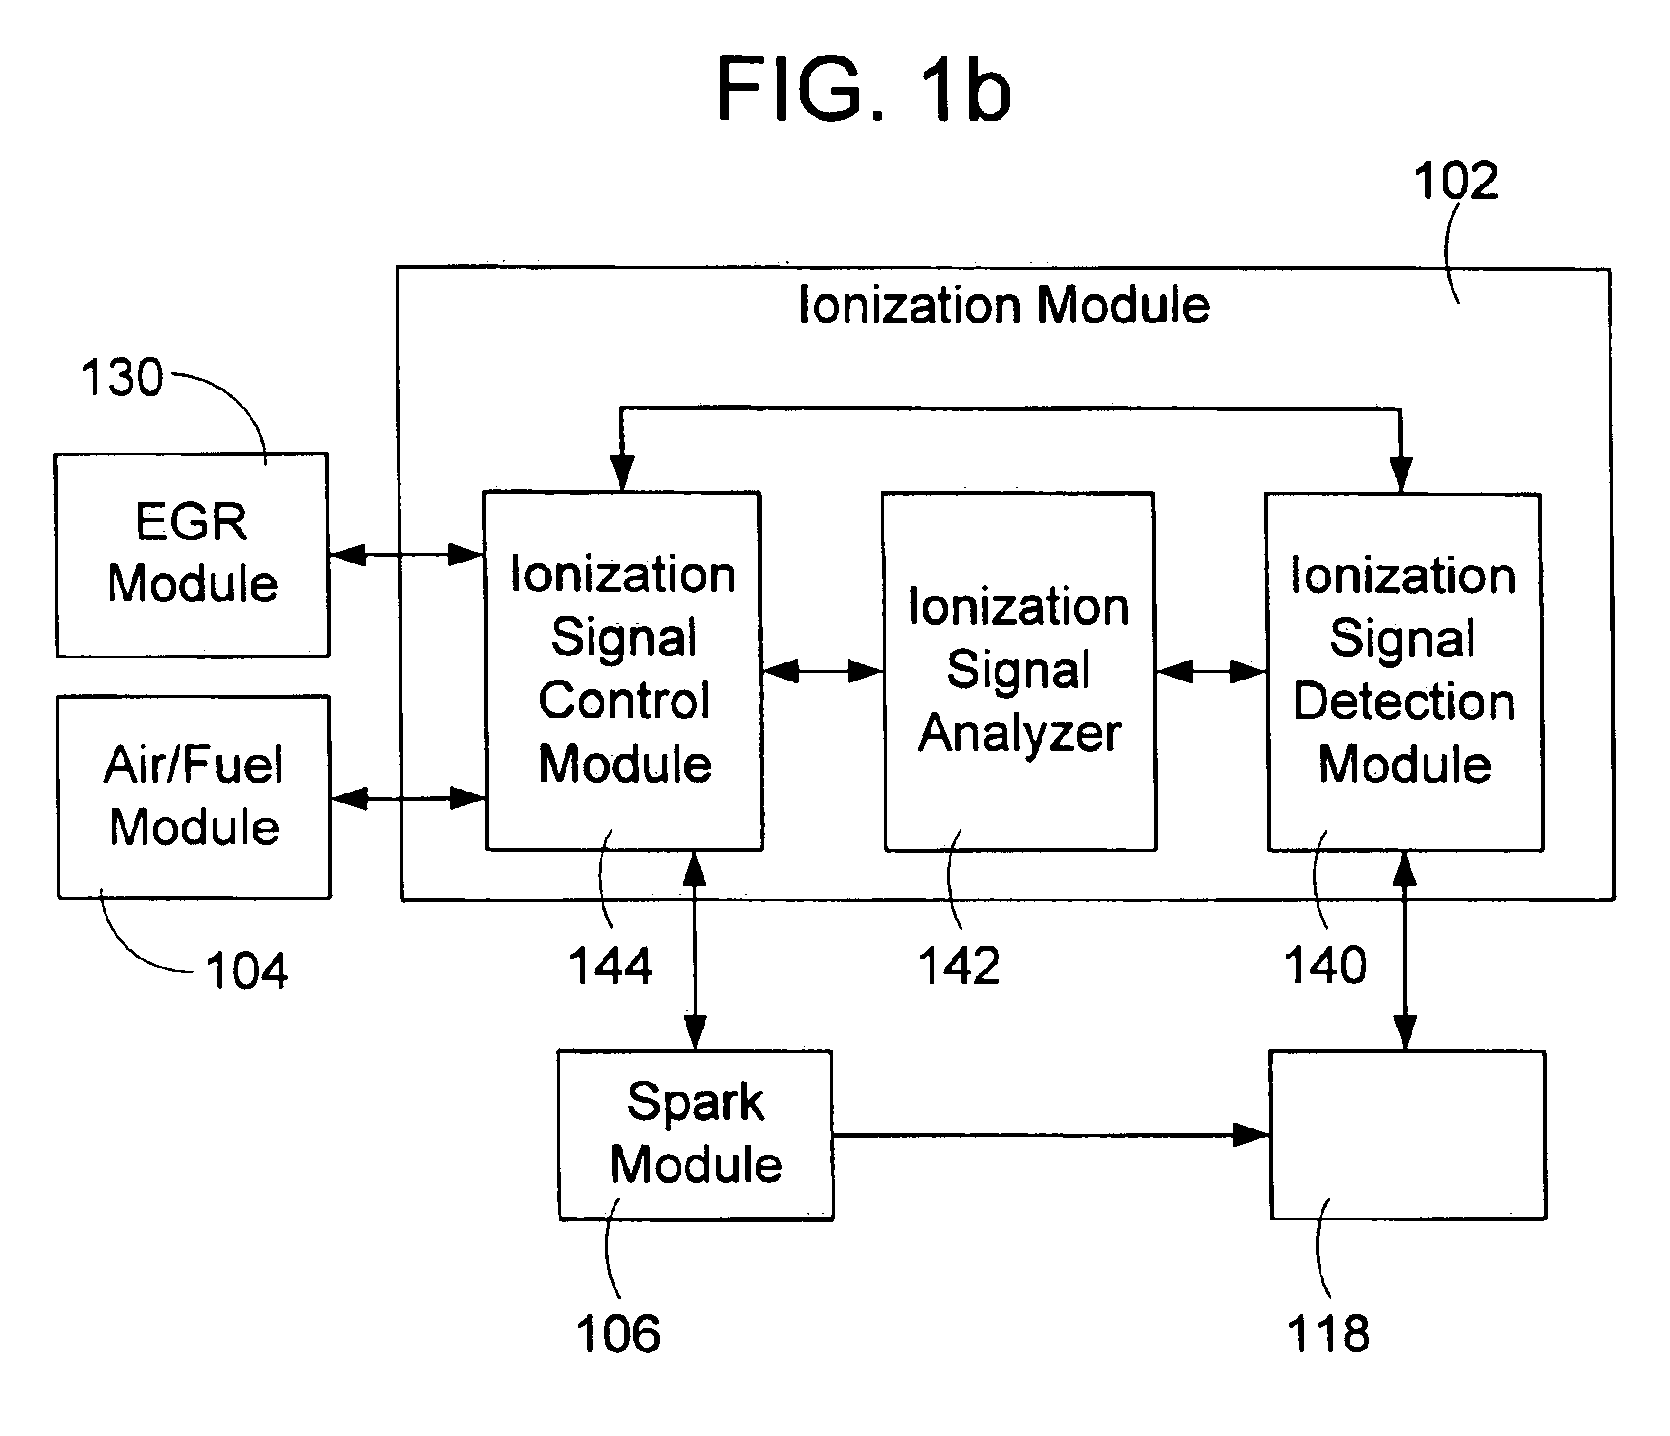 Method and apparatus for detecting abnormal combustion conditions in reciprocating engines having high exhaust gas recirculation